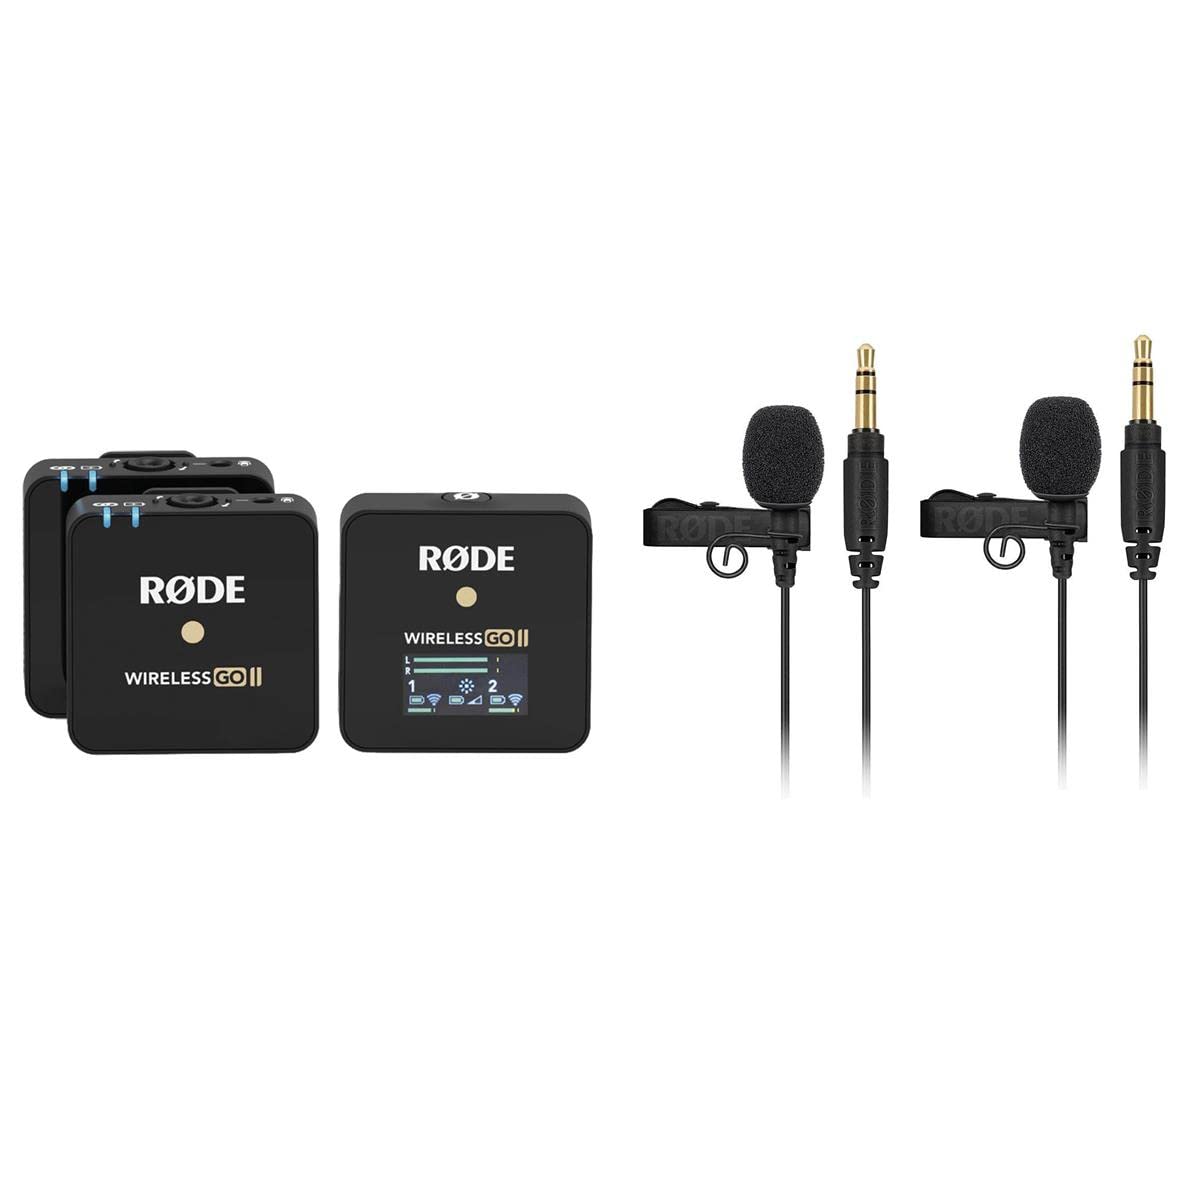 Rode Wireless GO II Compact Microphone System with 2x Transmitters and 1x Receiver - With 2x  Lavalier GO Professional-Grade Microphone